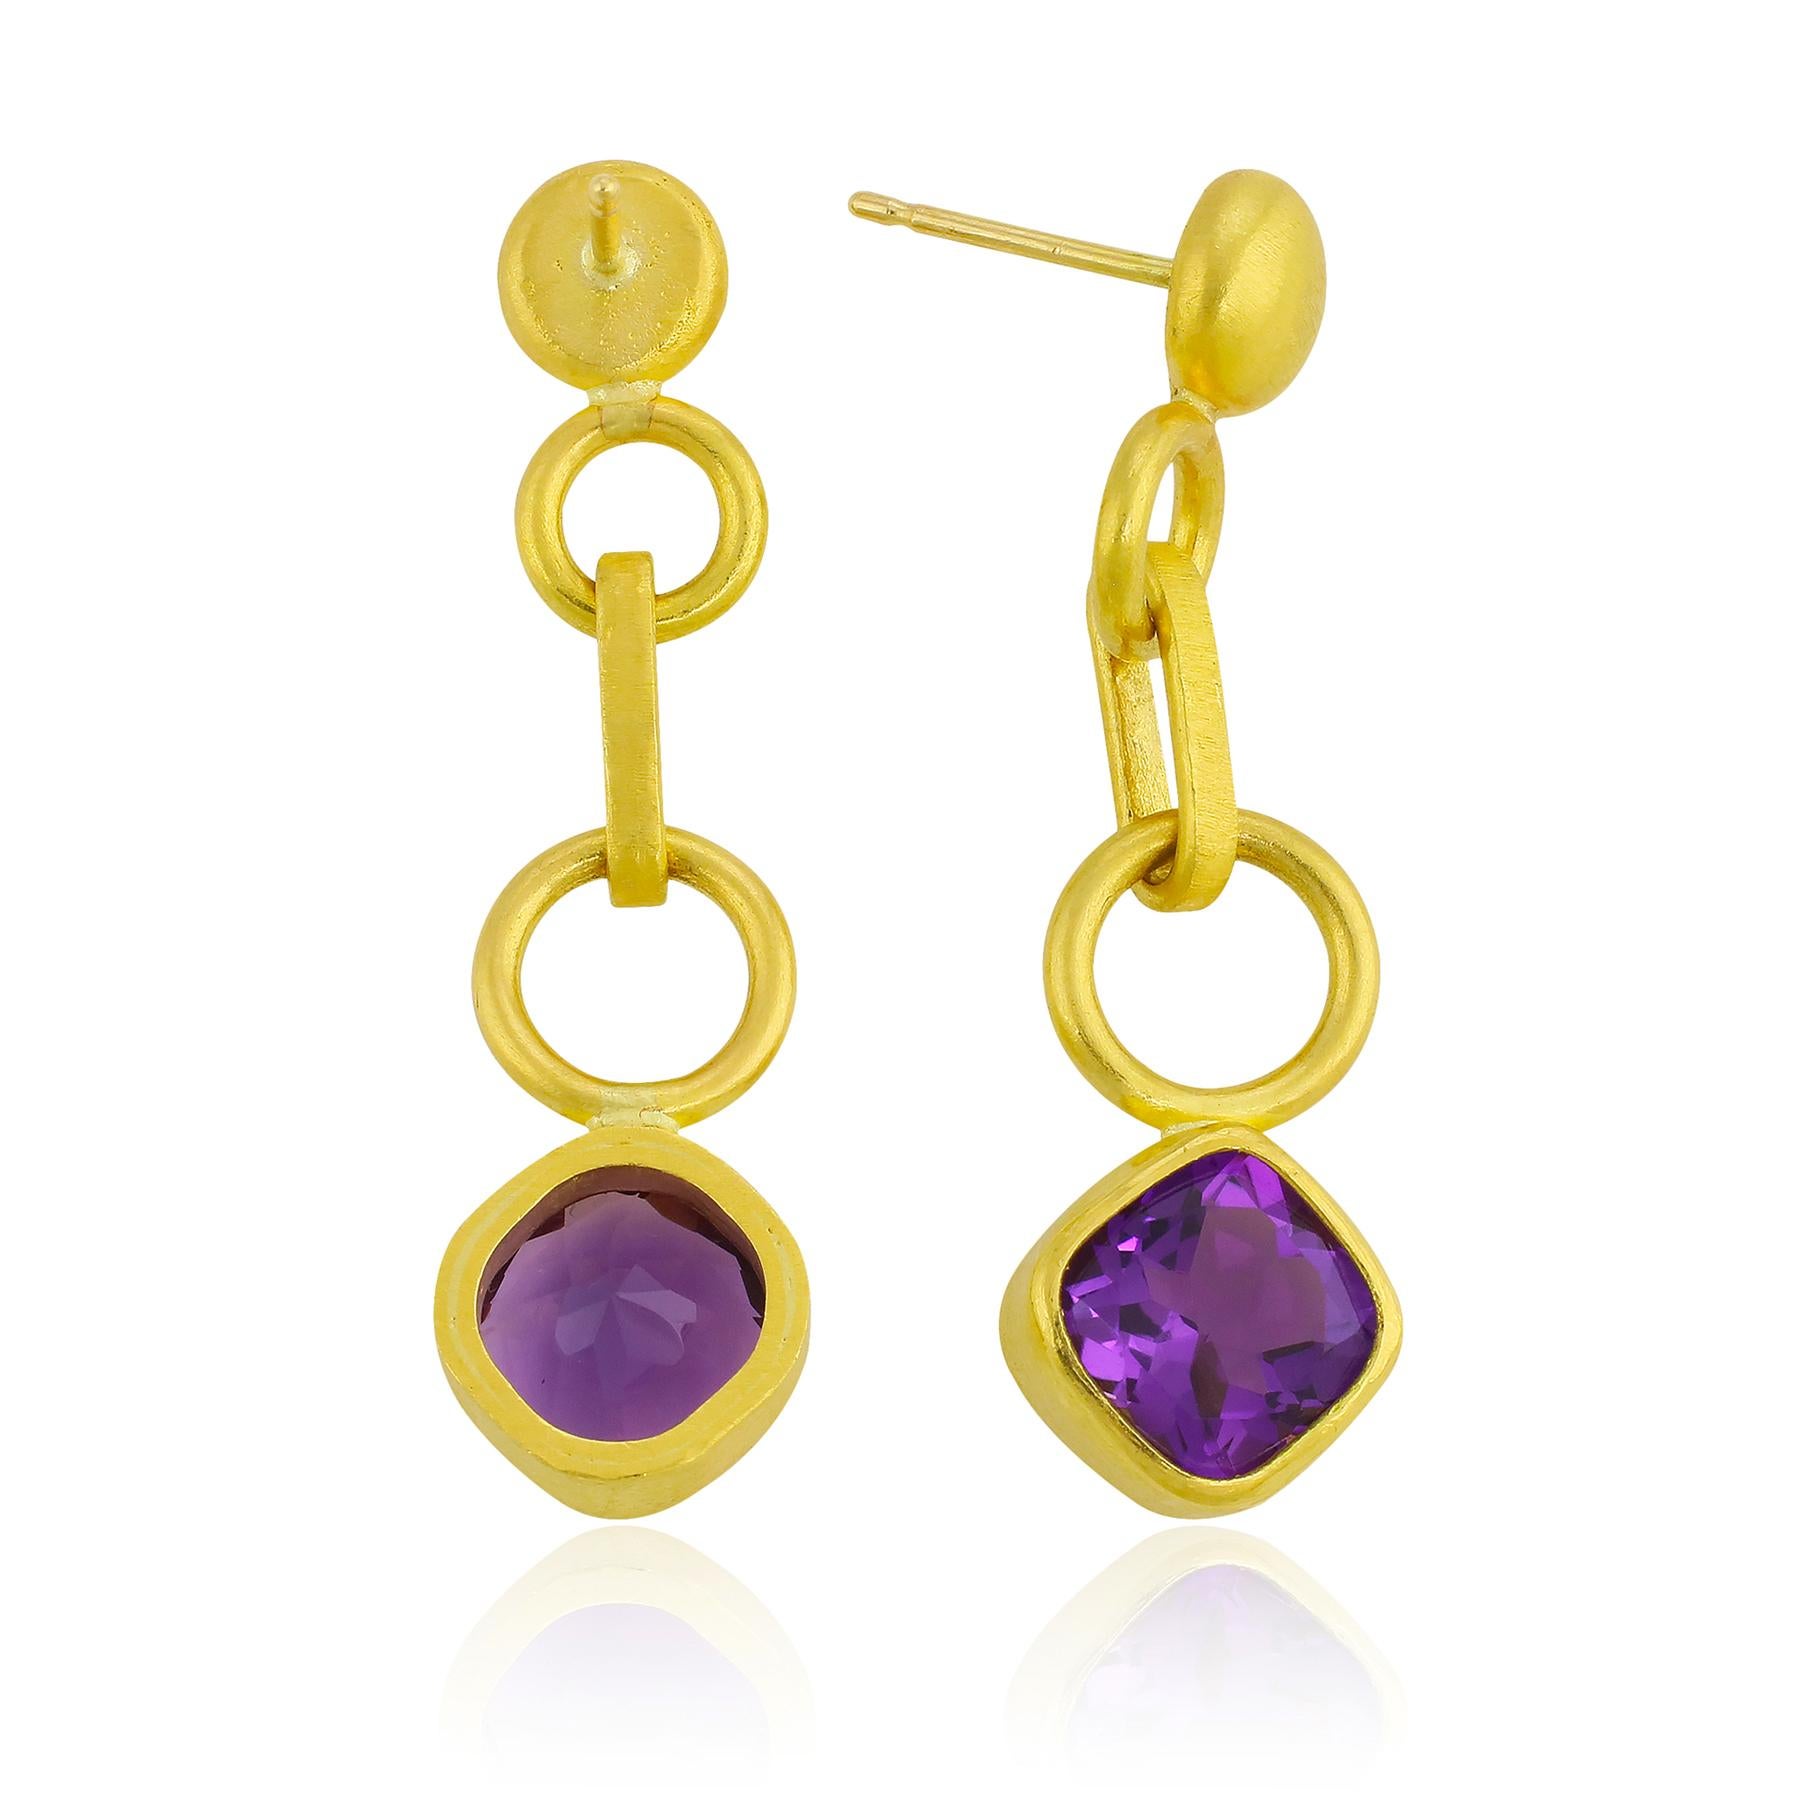 PHILIPPE SPENCER - Pure 22K Gold One-Of-A-Kind Dangling Statement Earrings with backless set 5.6 Ct. Total Square Cushion Cut Amethysts. 18K Post Back & Friction Nut for durability.

These beautiful and unique Hand-Forged Dangling Statement Earrings